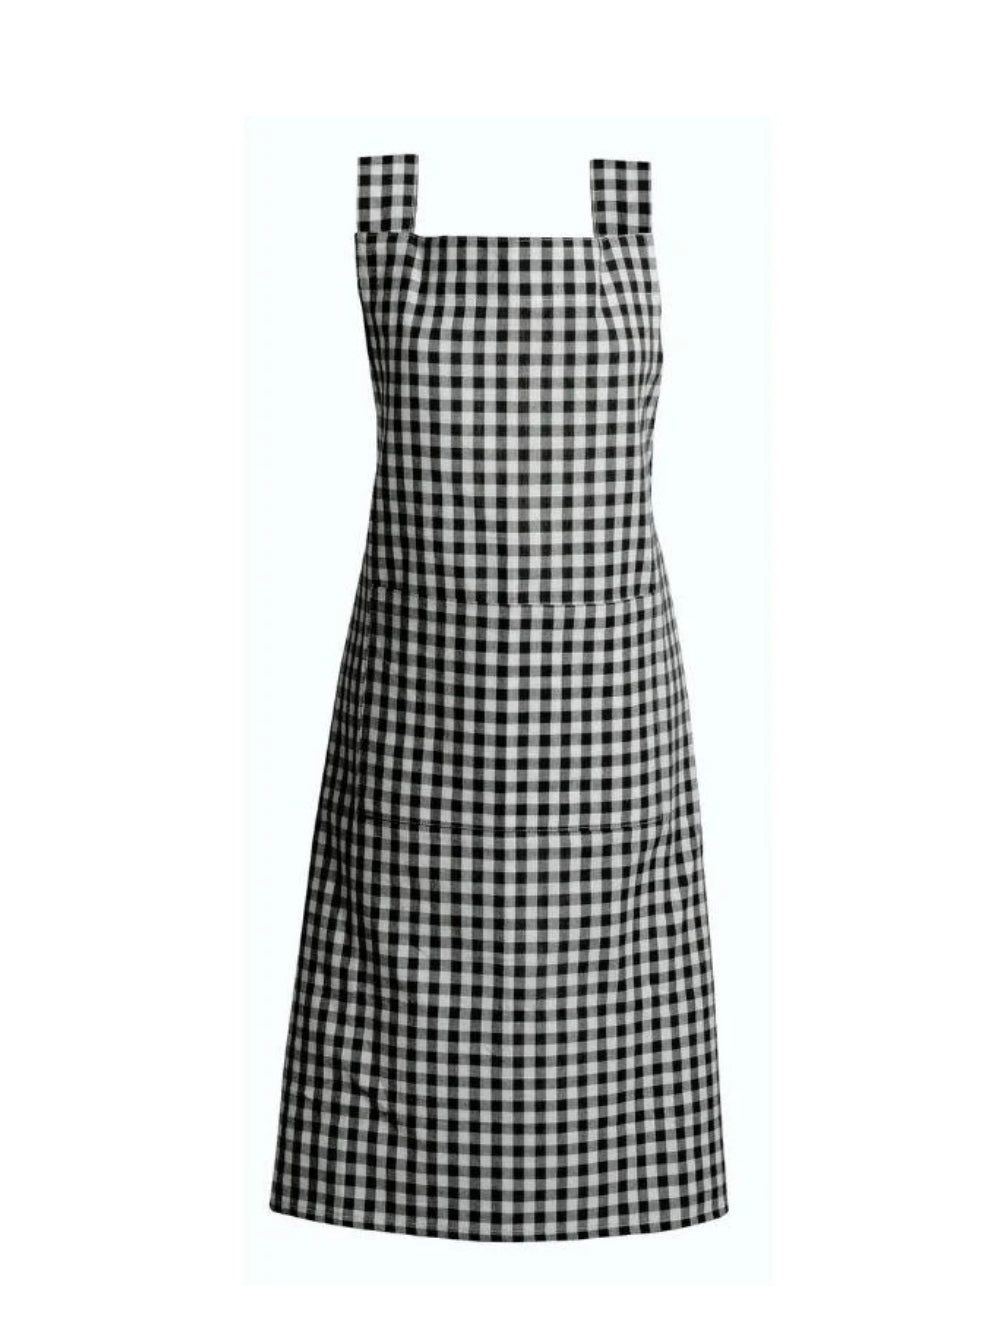 Gingham apron black and white